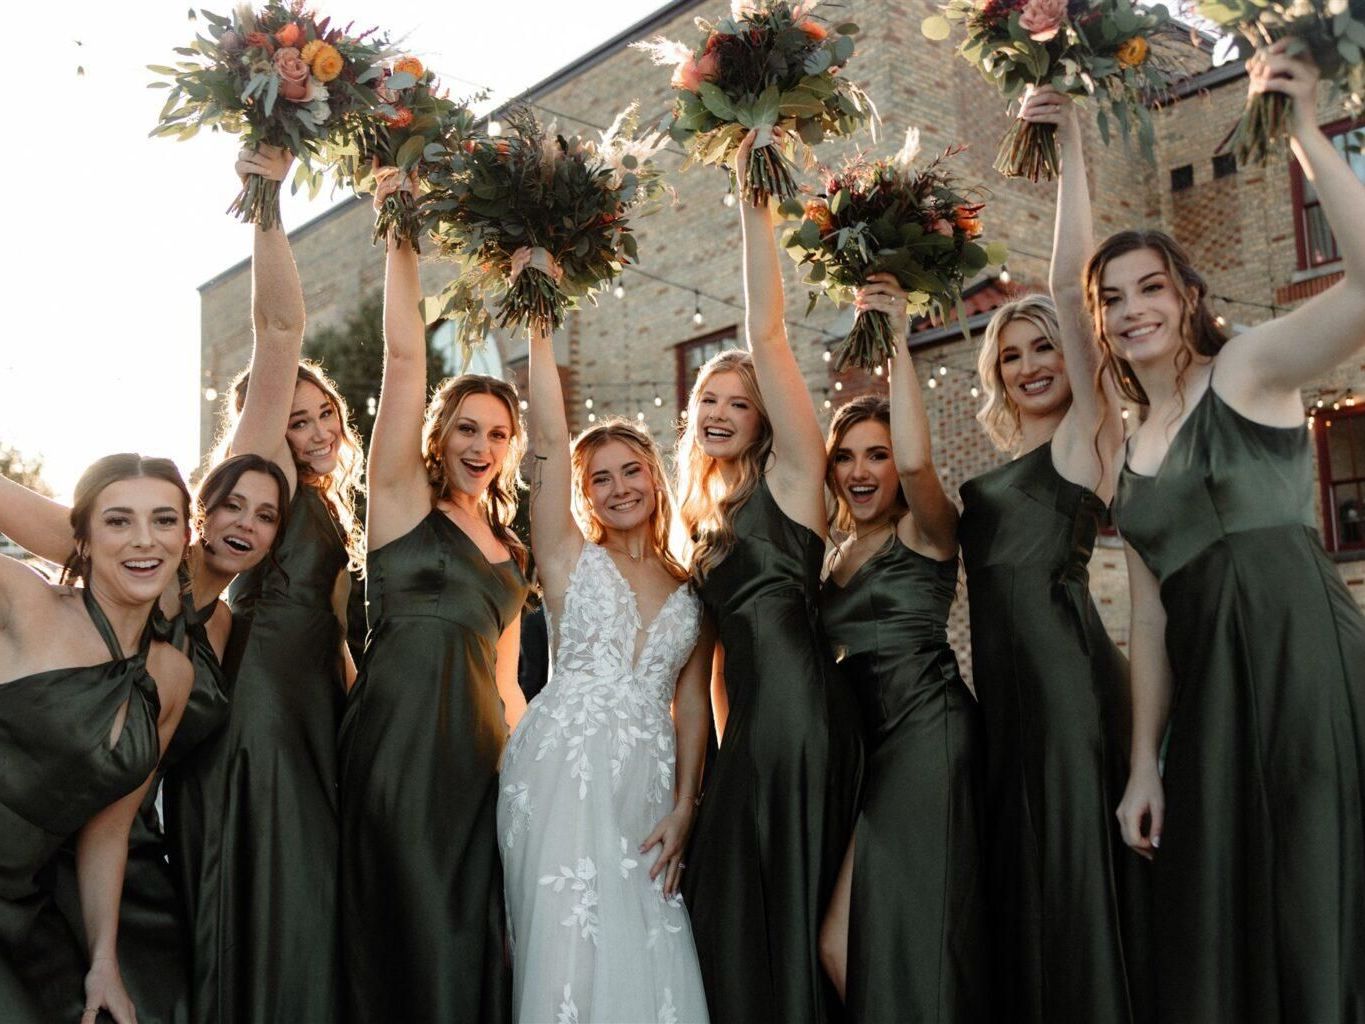 A joyful bachelorette party, with a group of women in matching dresses, laughing and celebrating